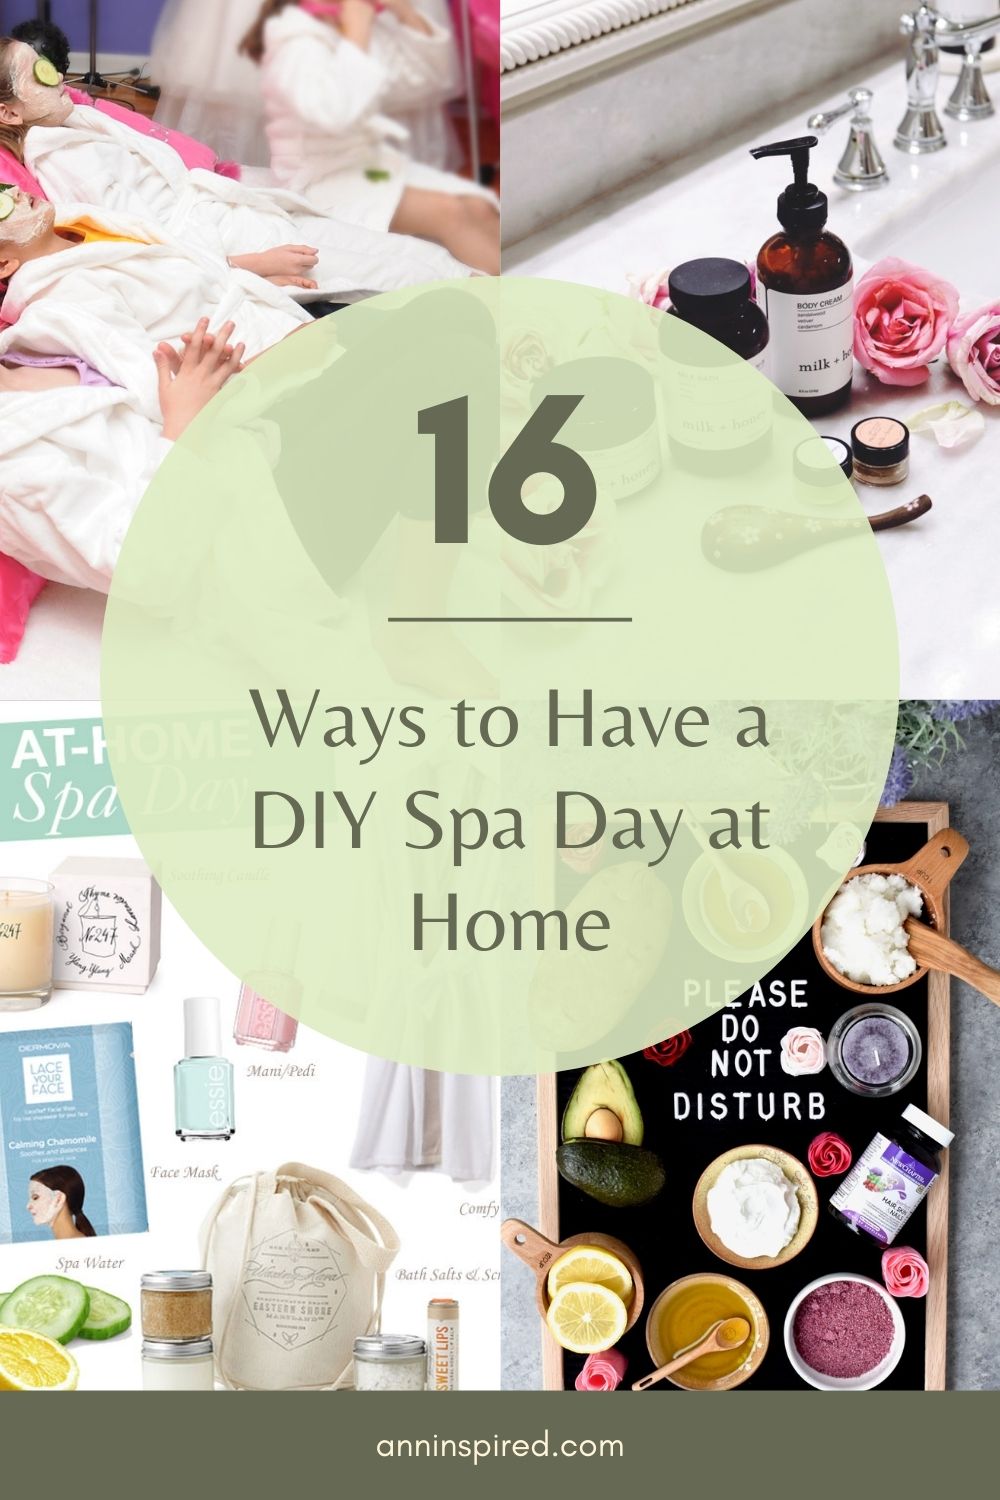 16 Ways to Have a DIY Spa Day at Home